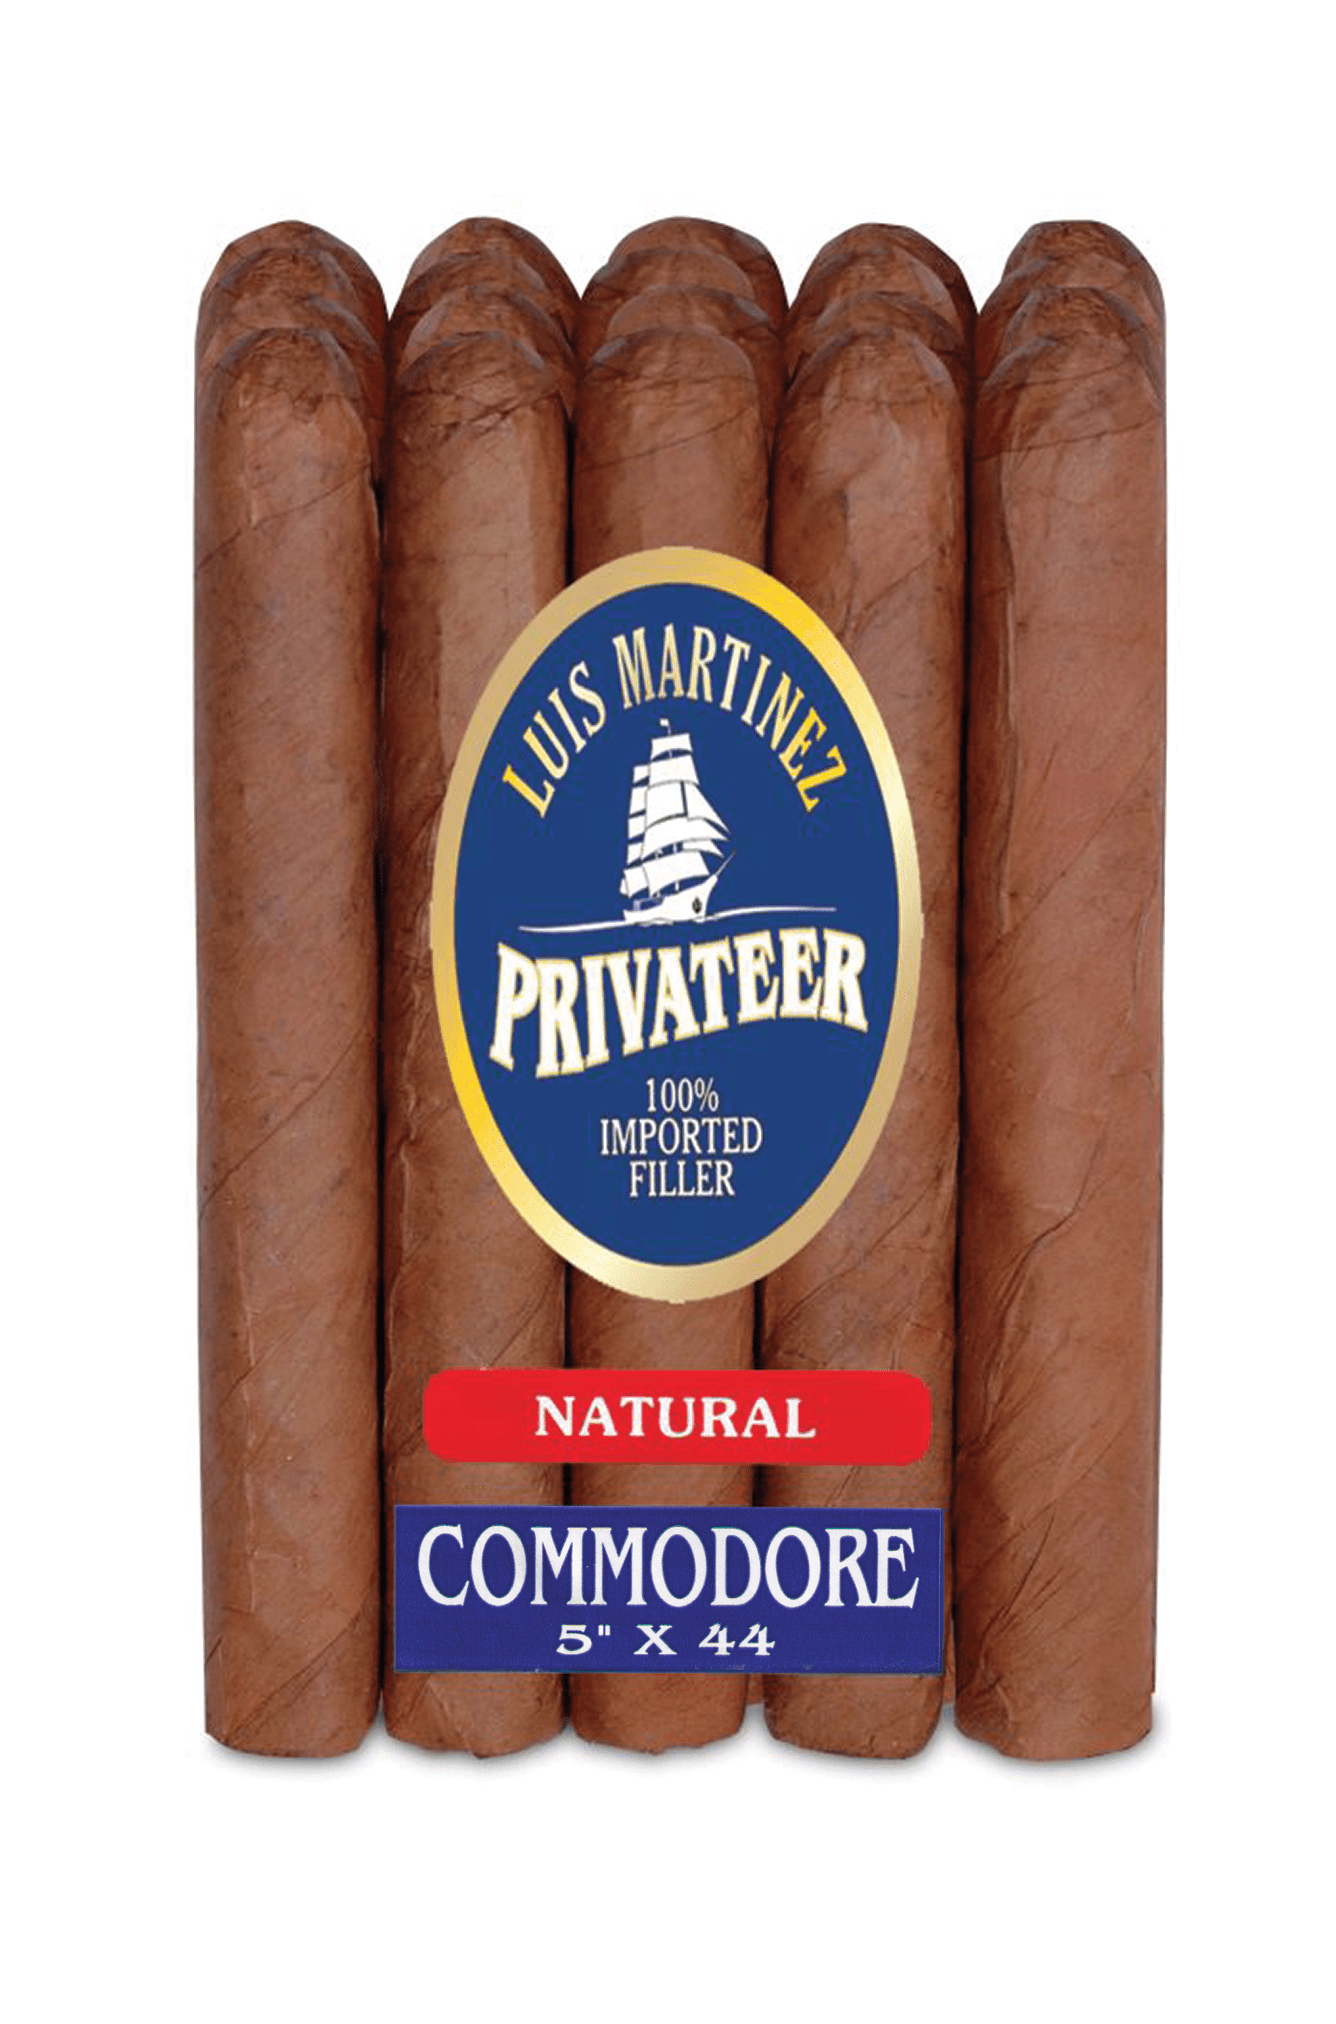 Bundle of 24 count Luis Martinez Privateer Commodore Natural cigars